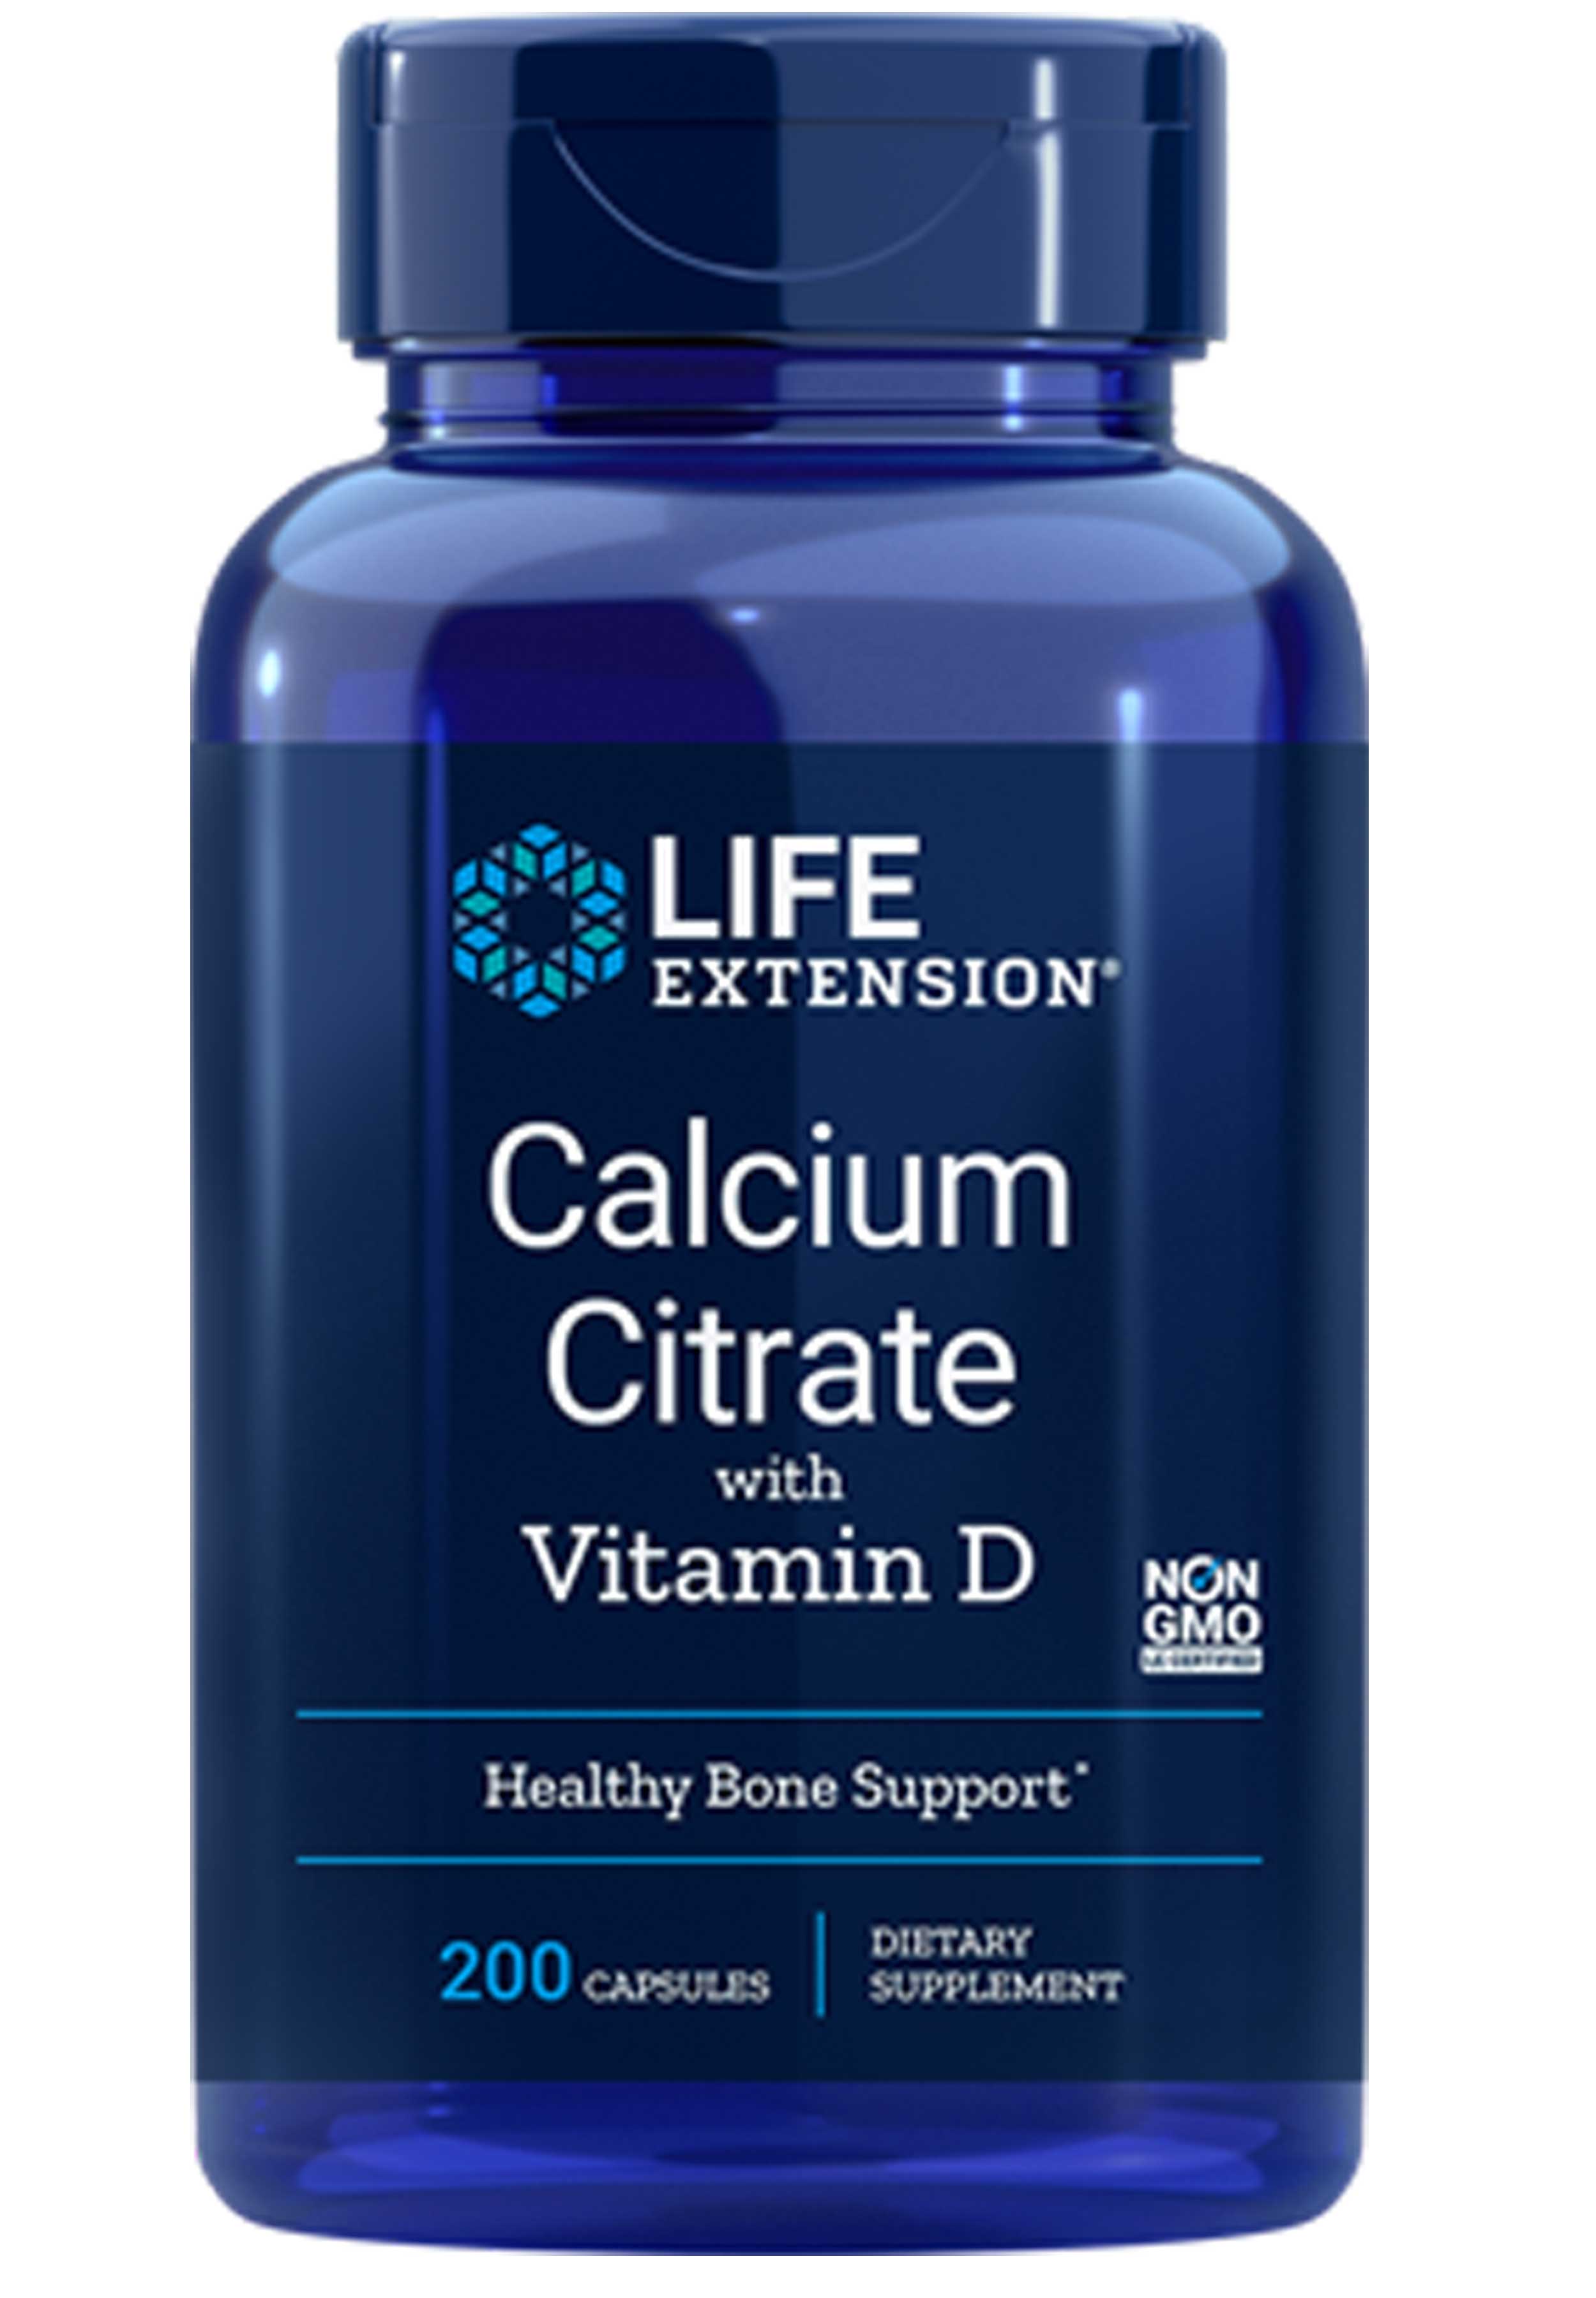 Life Extension Calcium Citrate with Vitamin D